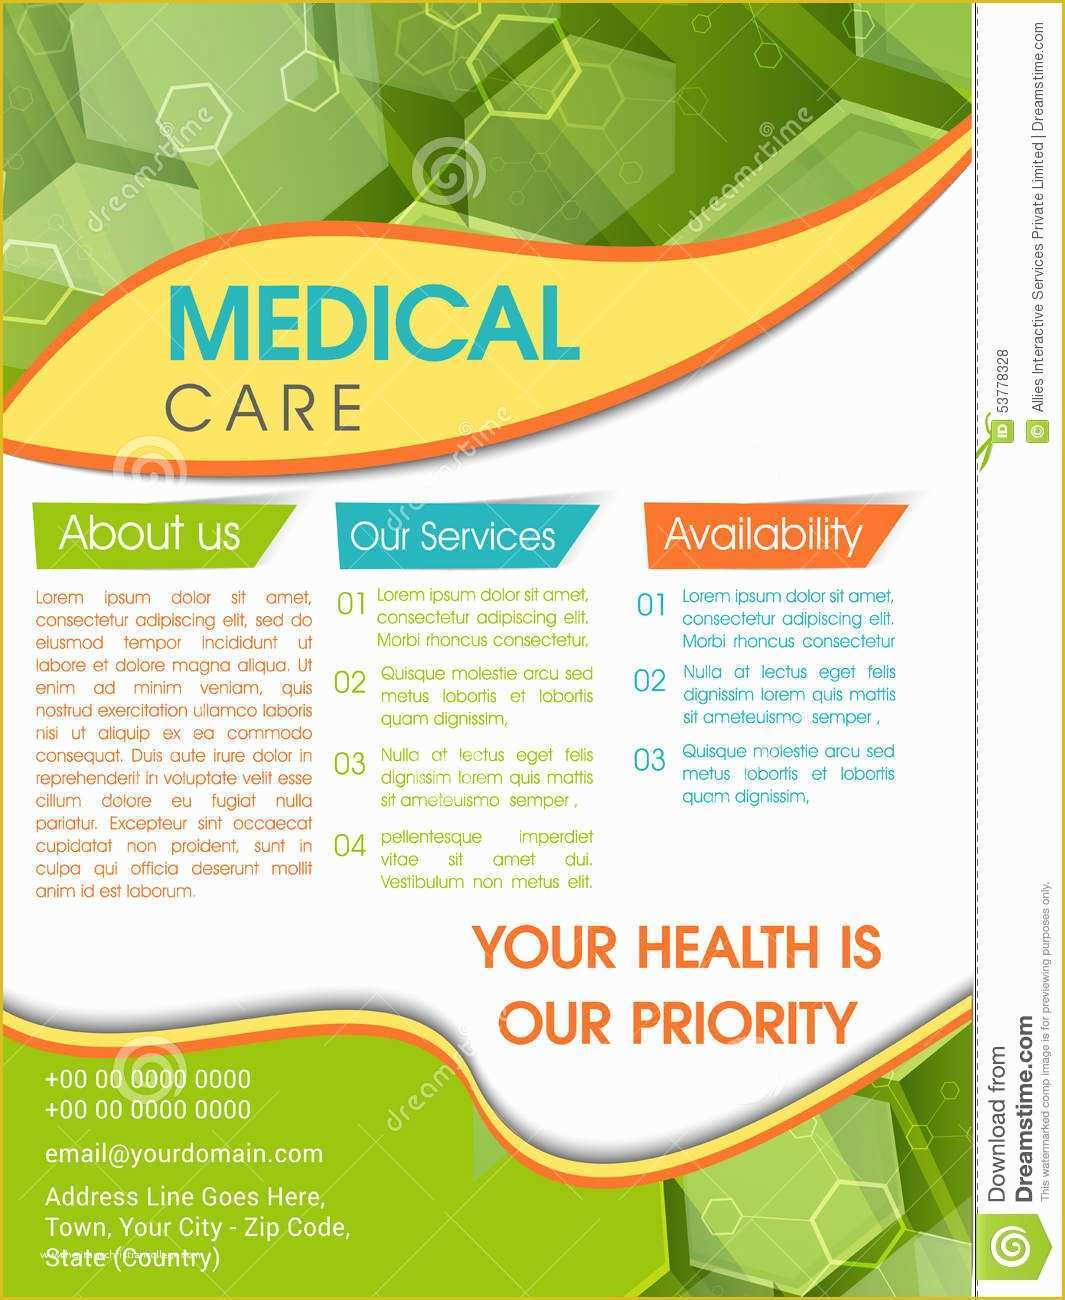 Health Care Flyer Template Free Of Template Brochure Flyer for Medical Care Stock